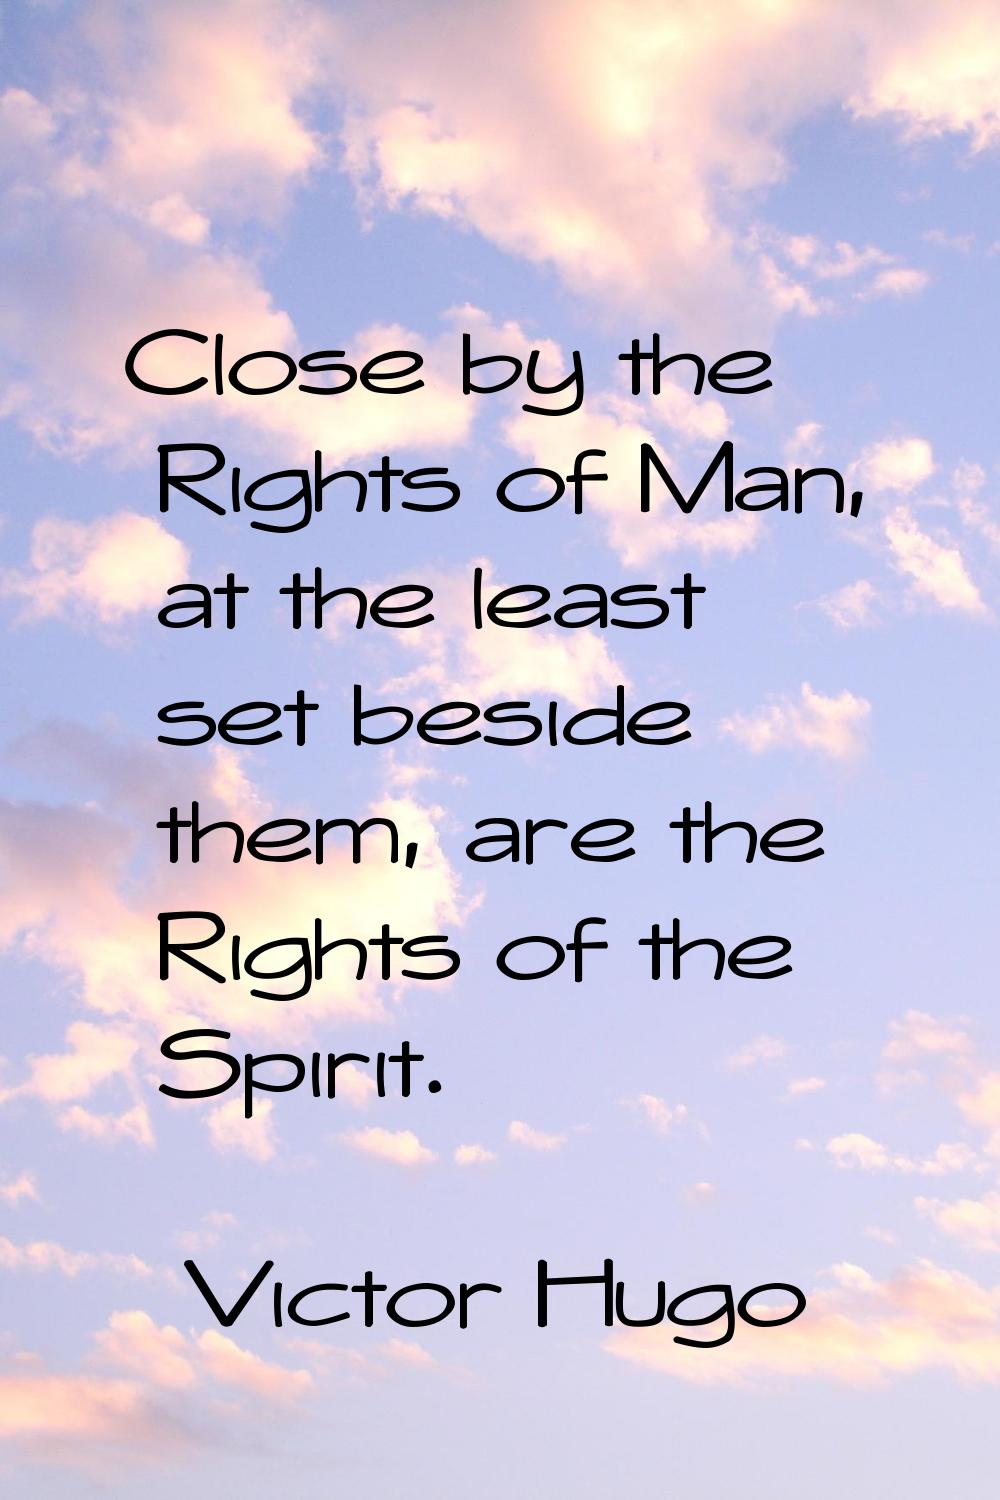 Close by the Rights of Man, at the least set beside them, are the Rights of the Spirit.